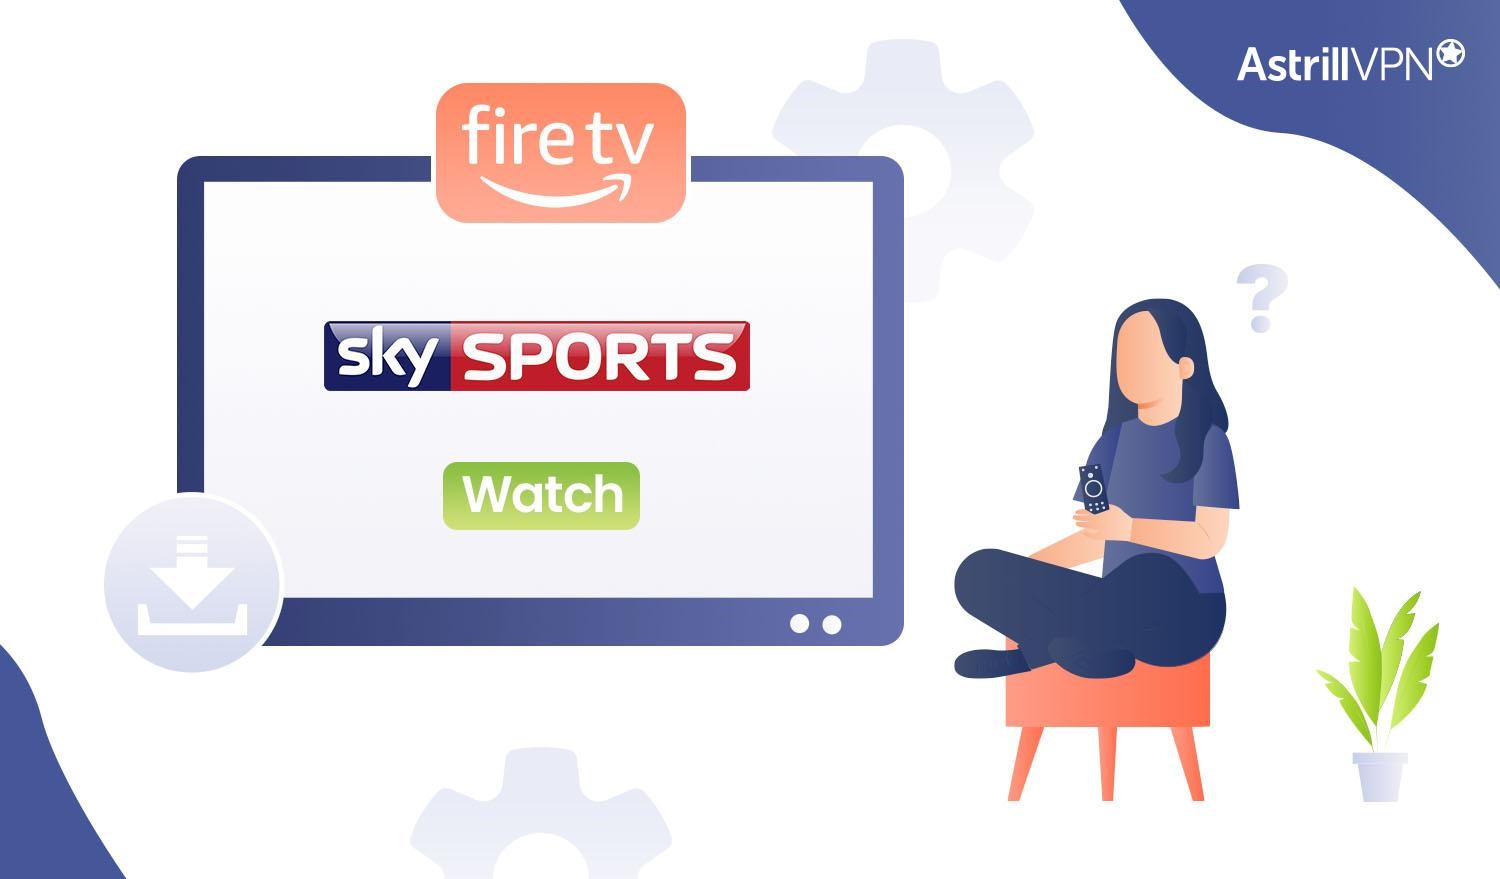 How to Install Sky Sports on Firestick